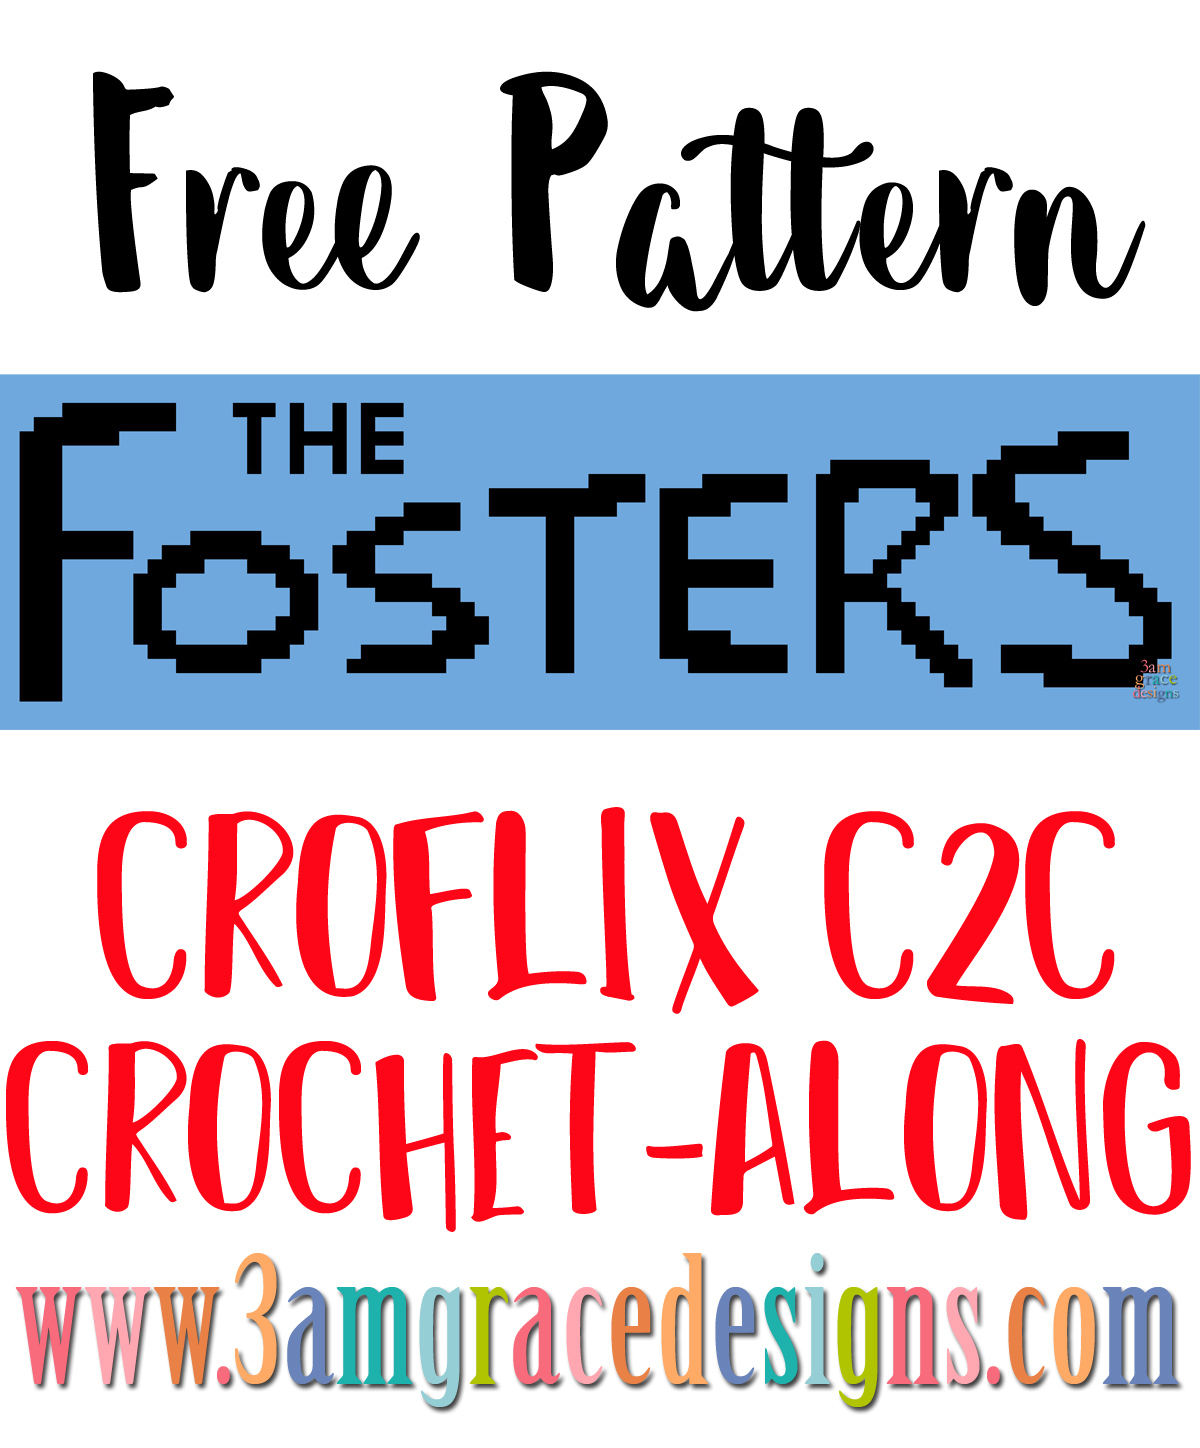 Croflix C2C CAL – The Fosters – Free Crochet Pattern